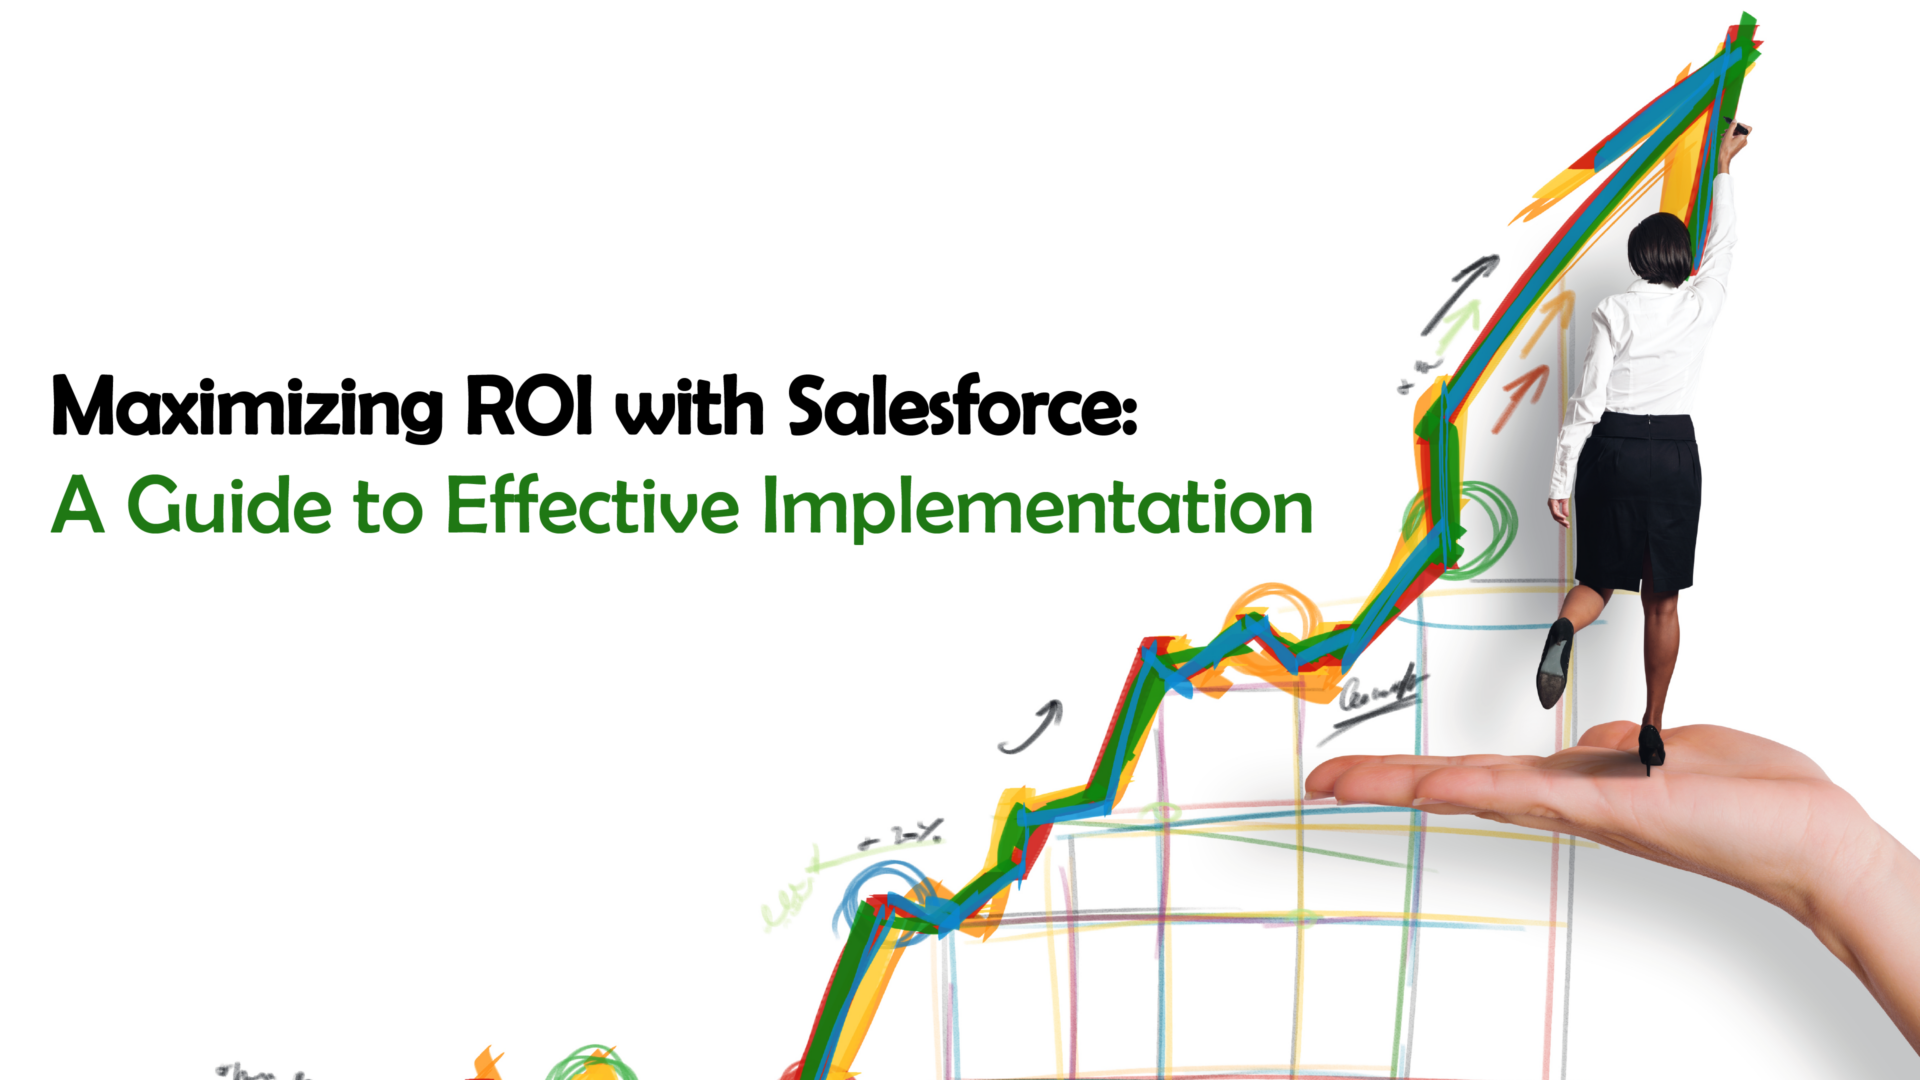 Maximizing ROI with Salesforce: A Guide to Effective Implementation